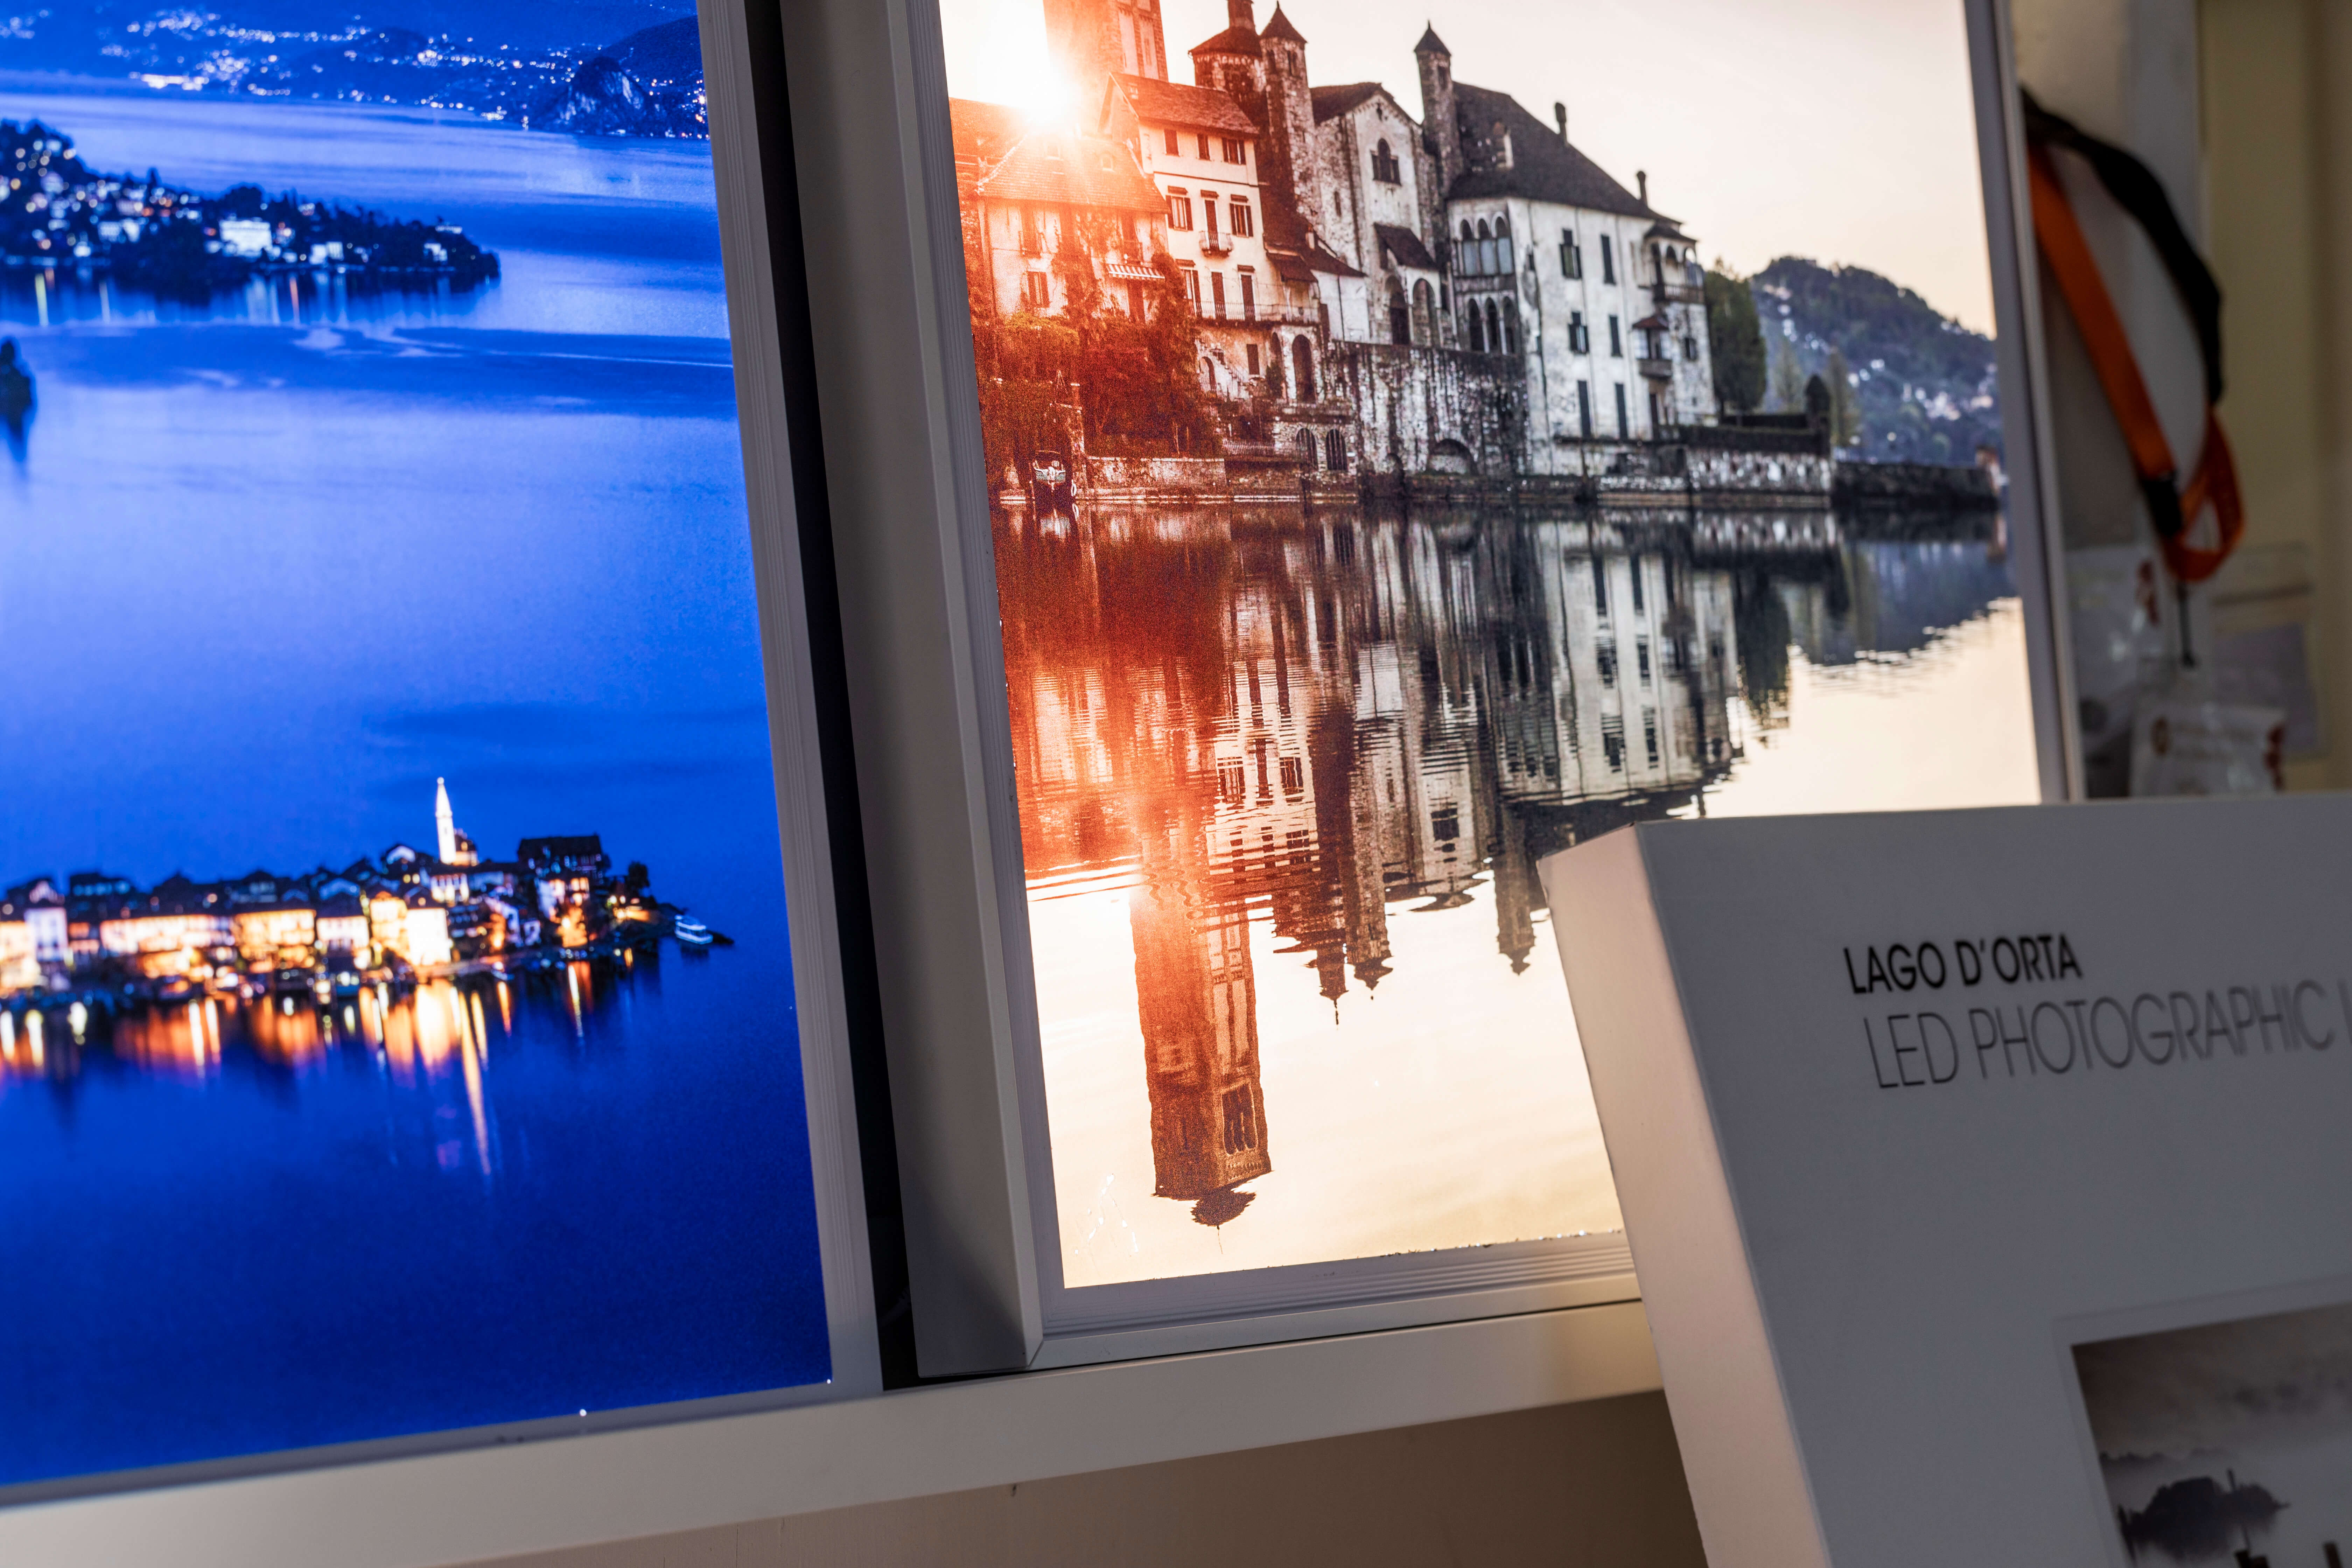 Backlit prints made with the Roland VersaUV LEC2 S Series, from photographs depicting Lake Orta and Lake Maggiore